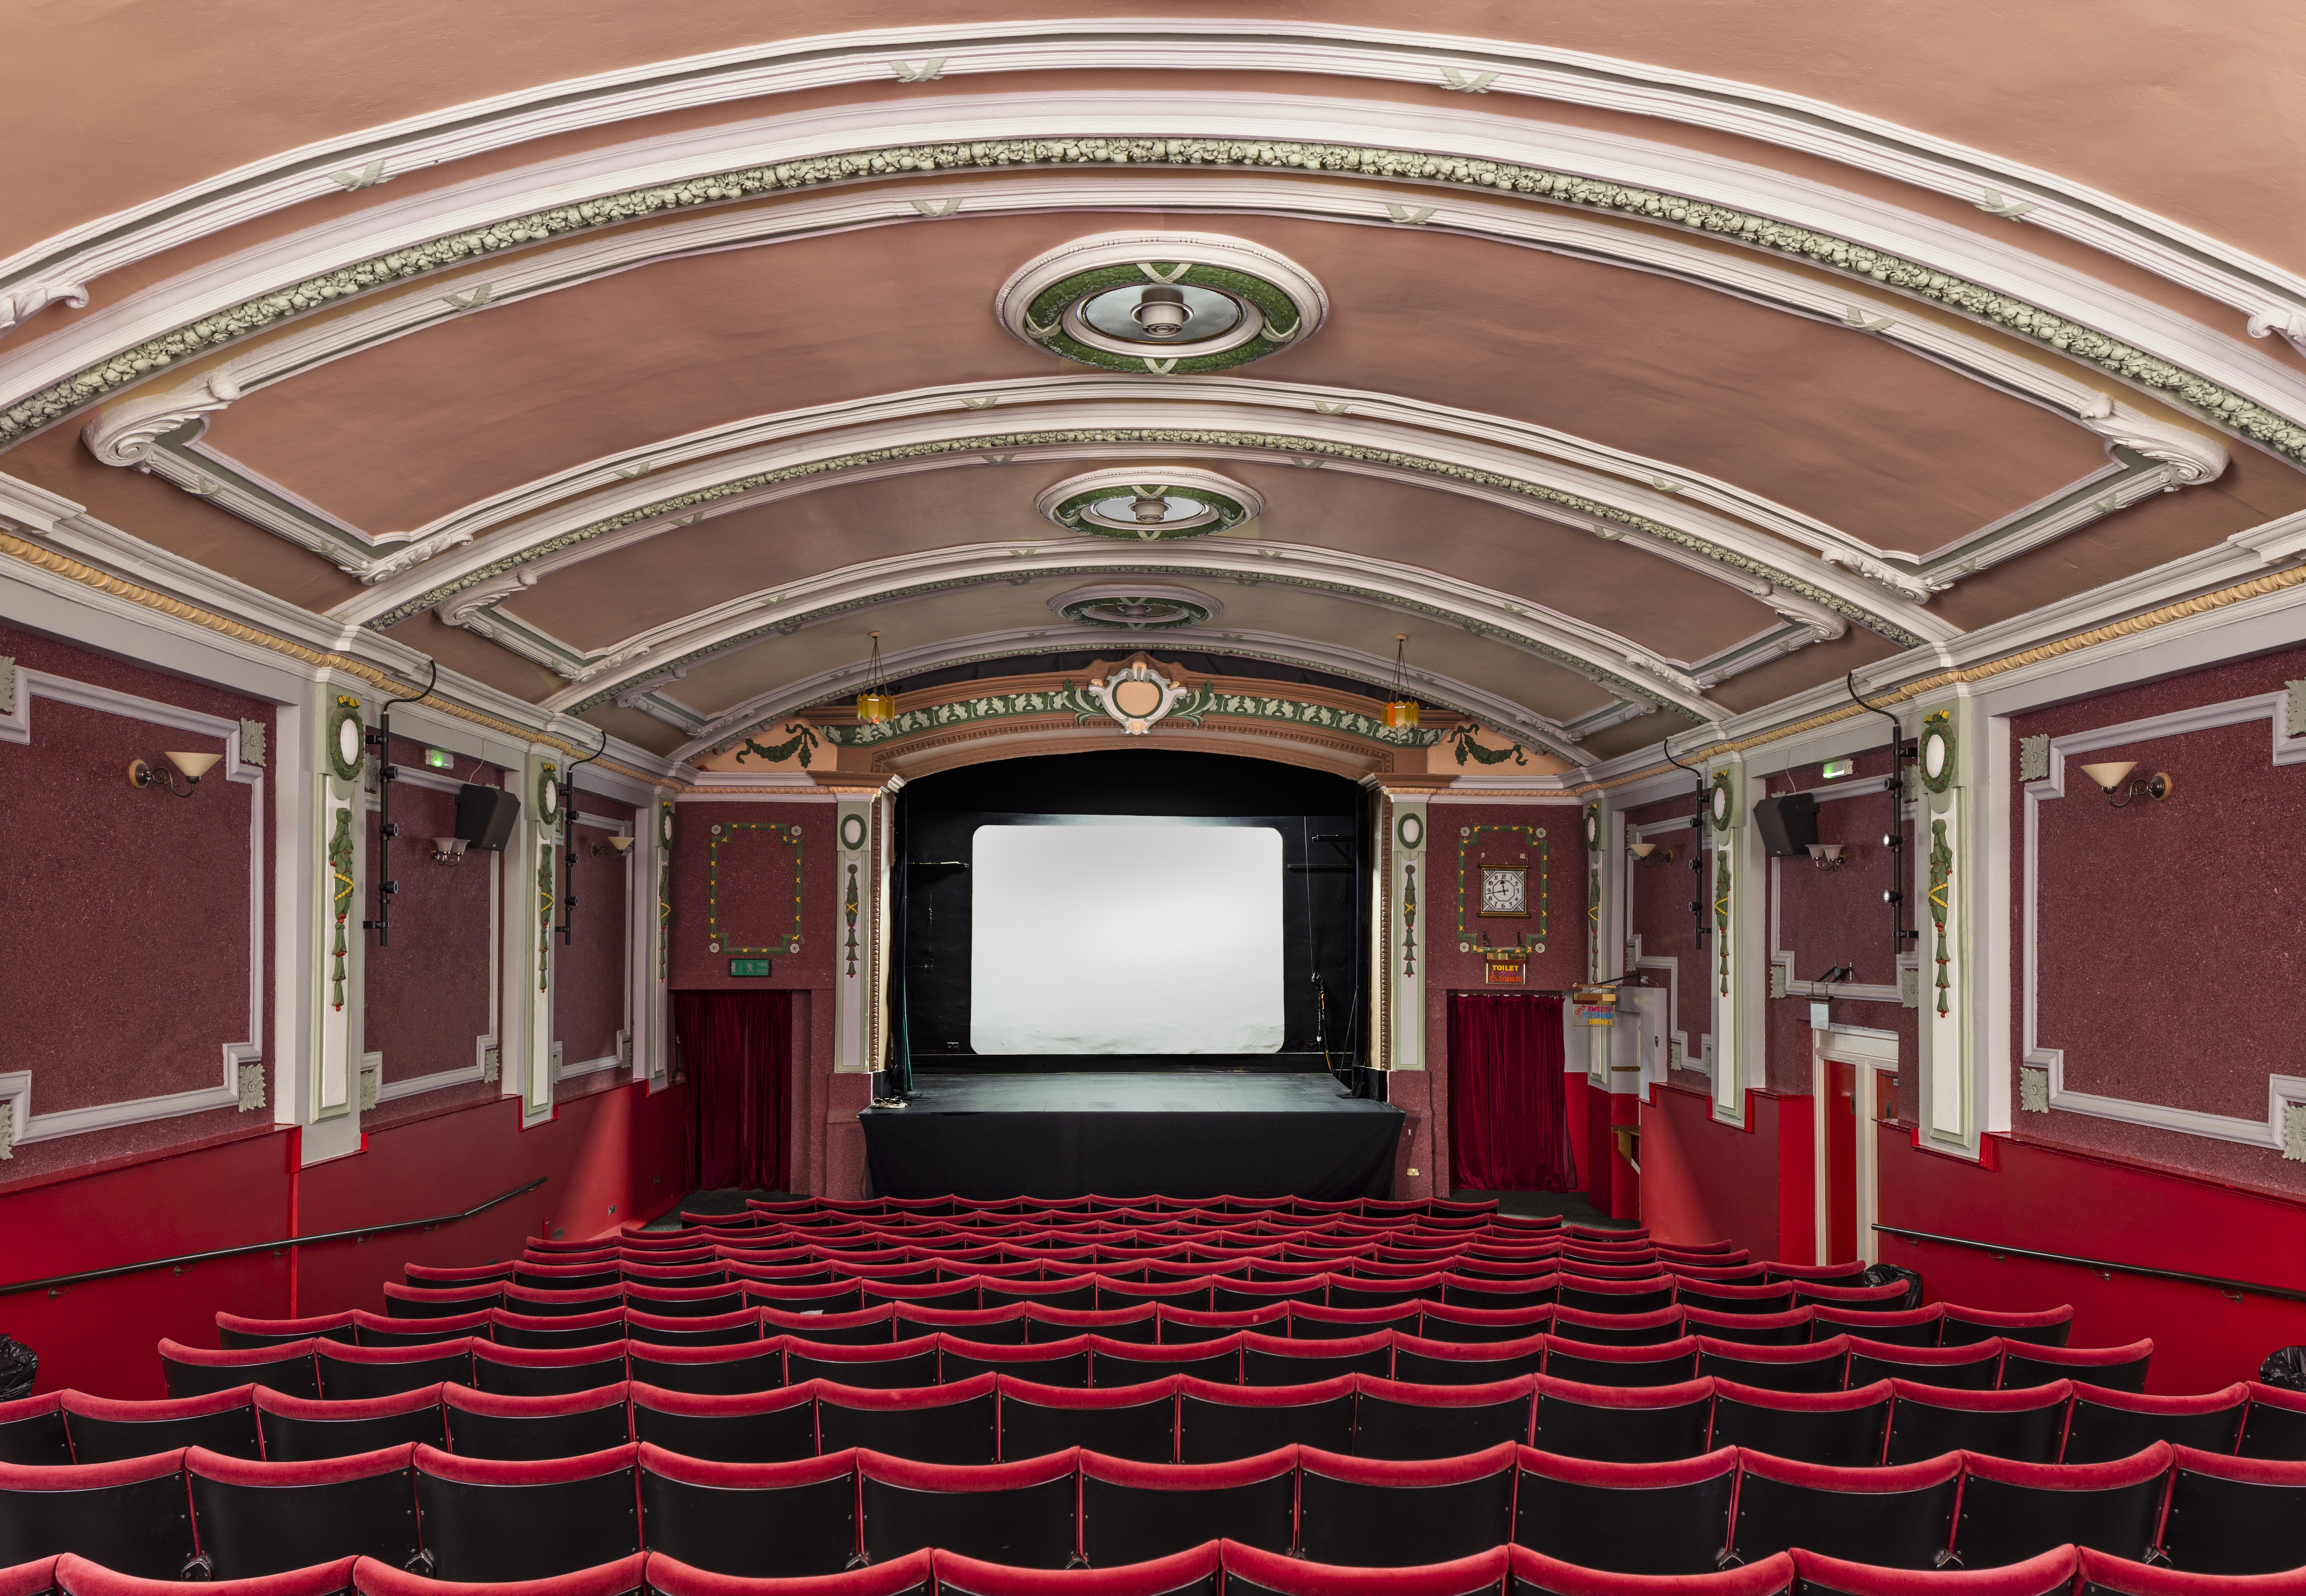 The newly-restored interior of the Electric Palace Cinema in Harwich, Essex. (Historic England Archive/ Stella Fitzgerald/ PA)